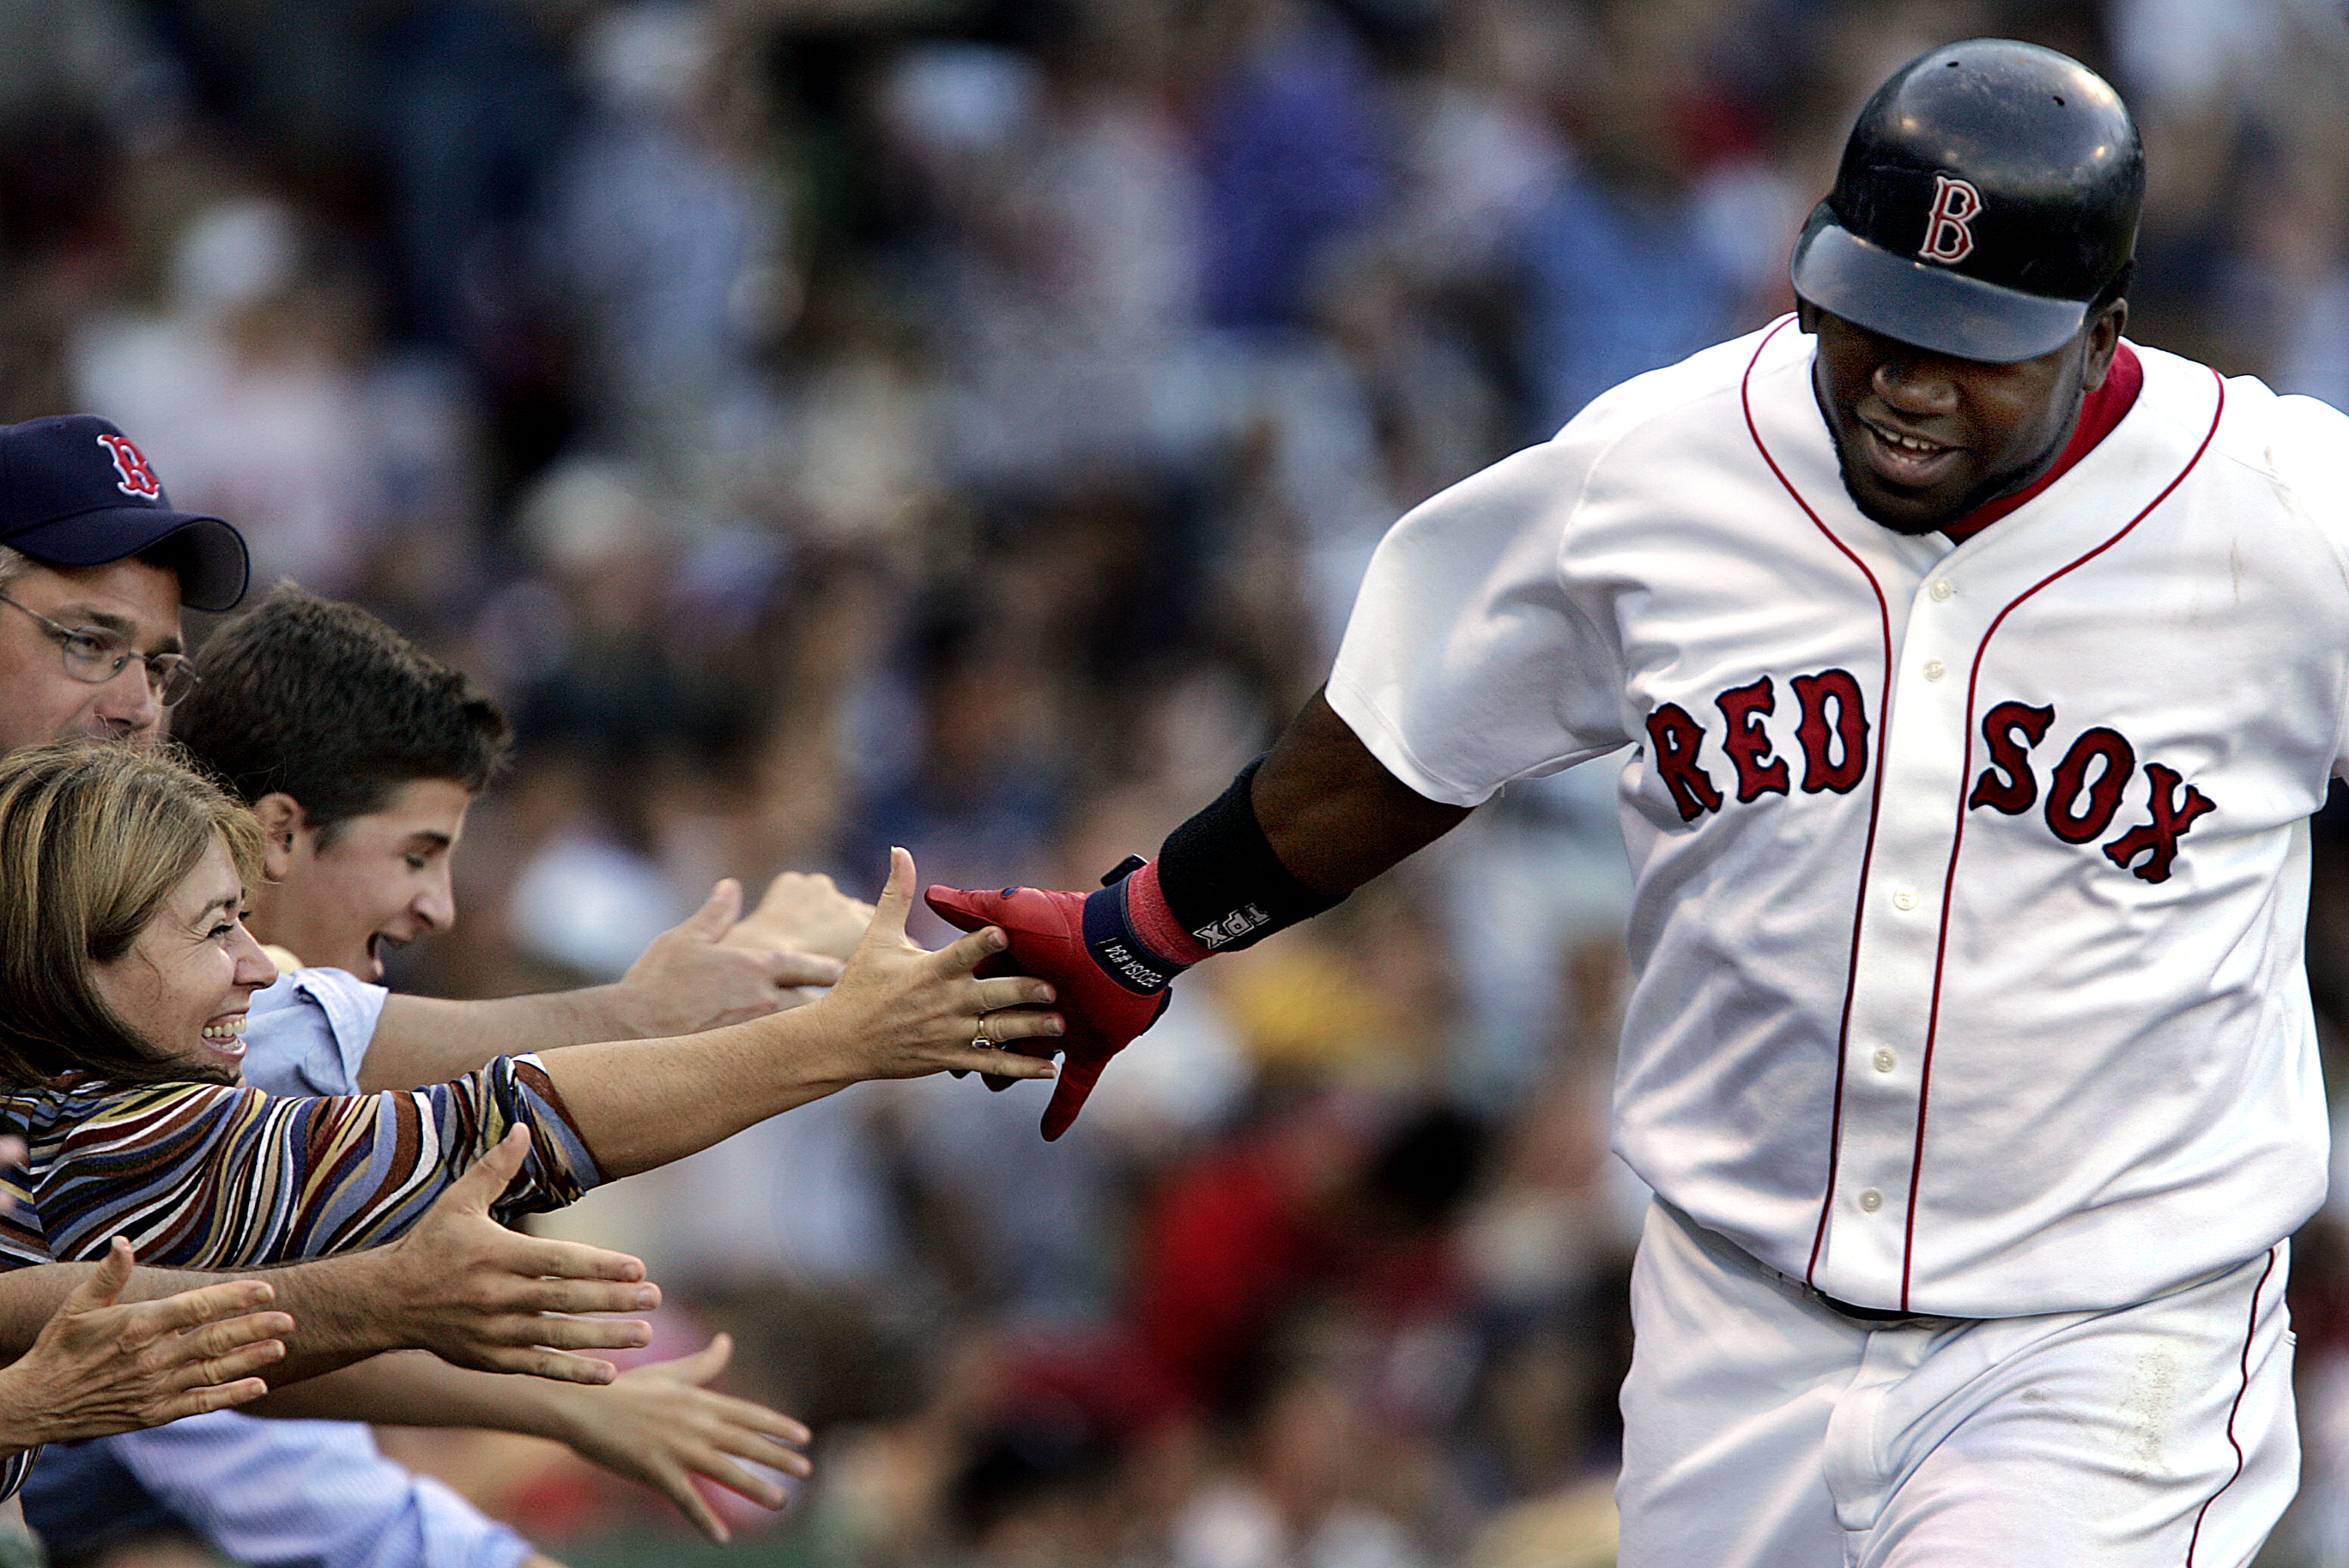 The Red Sox sold out every home game during the 2004 season en route to their first World Series title in 86 years. Here, Ortiz high-fives fans during the final regular-season game at Fenway Park that season, an 11-4 win over the Yankees.